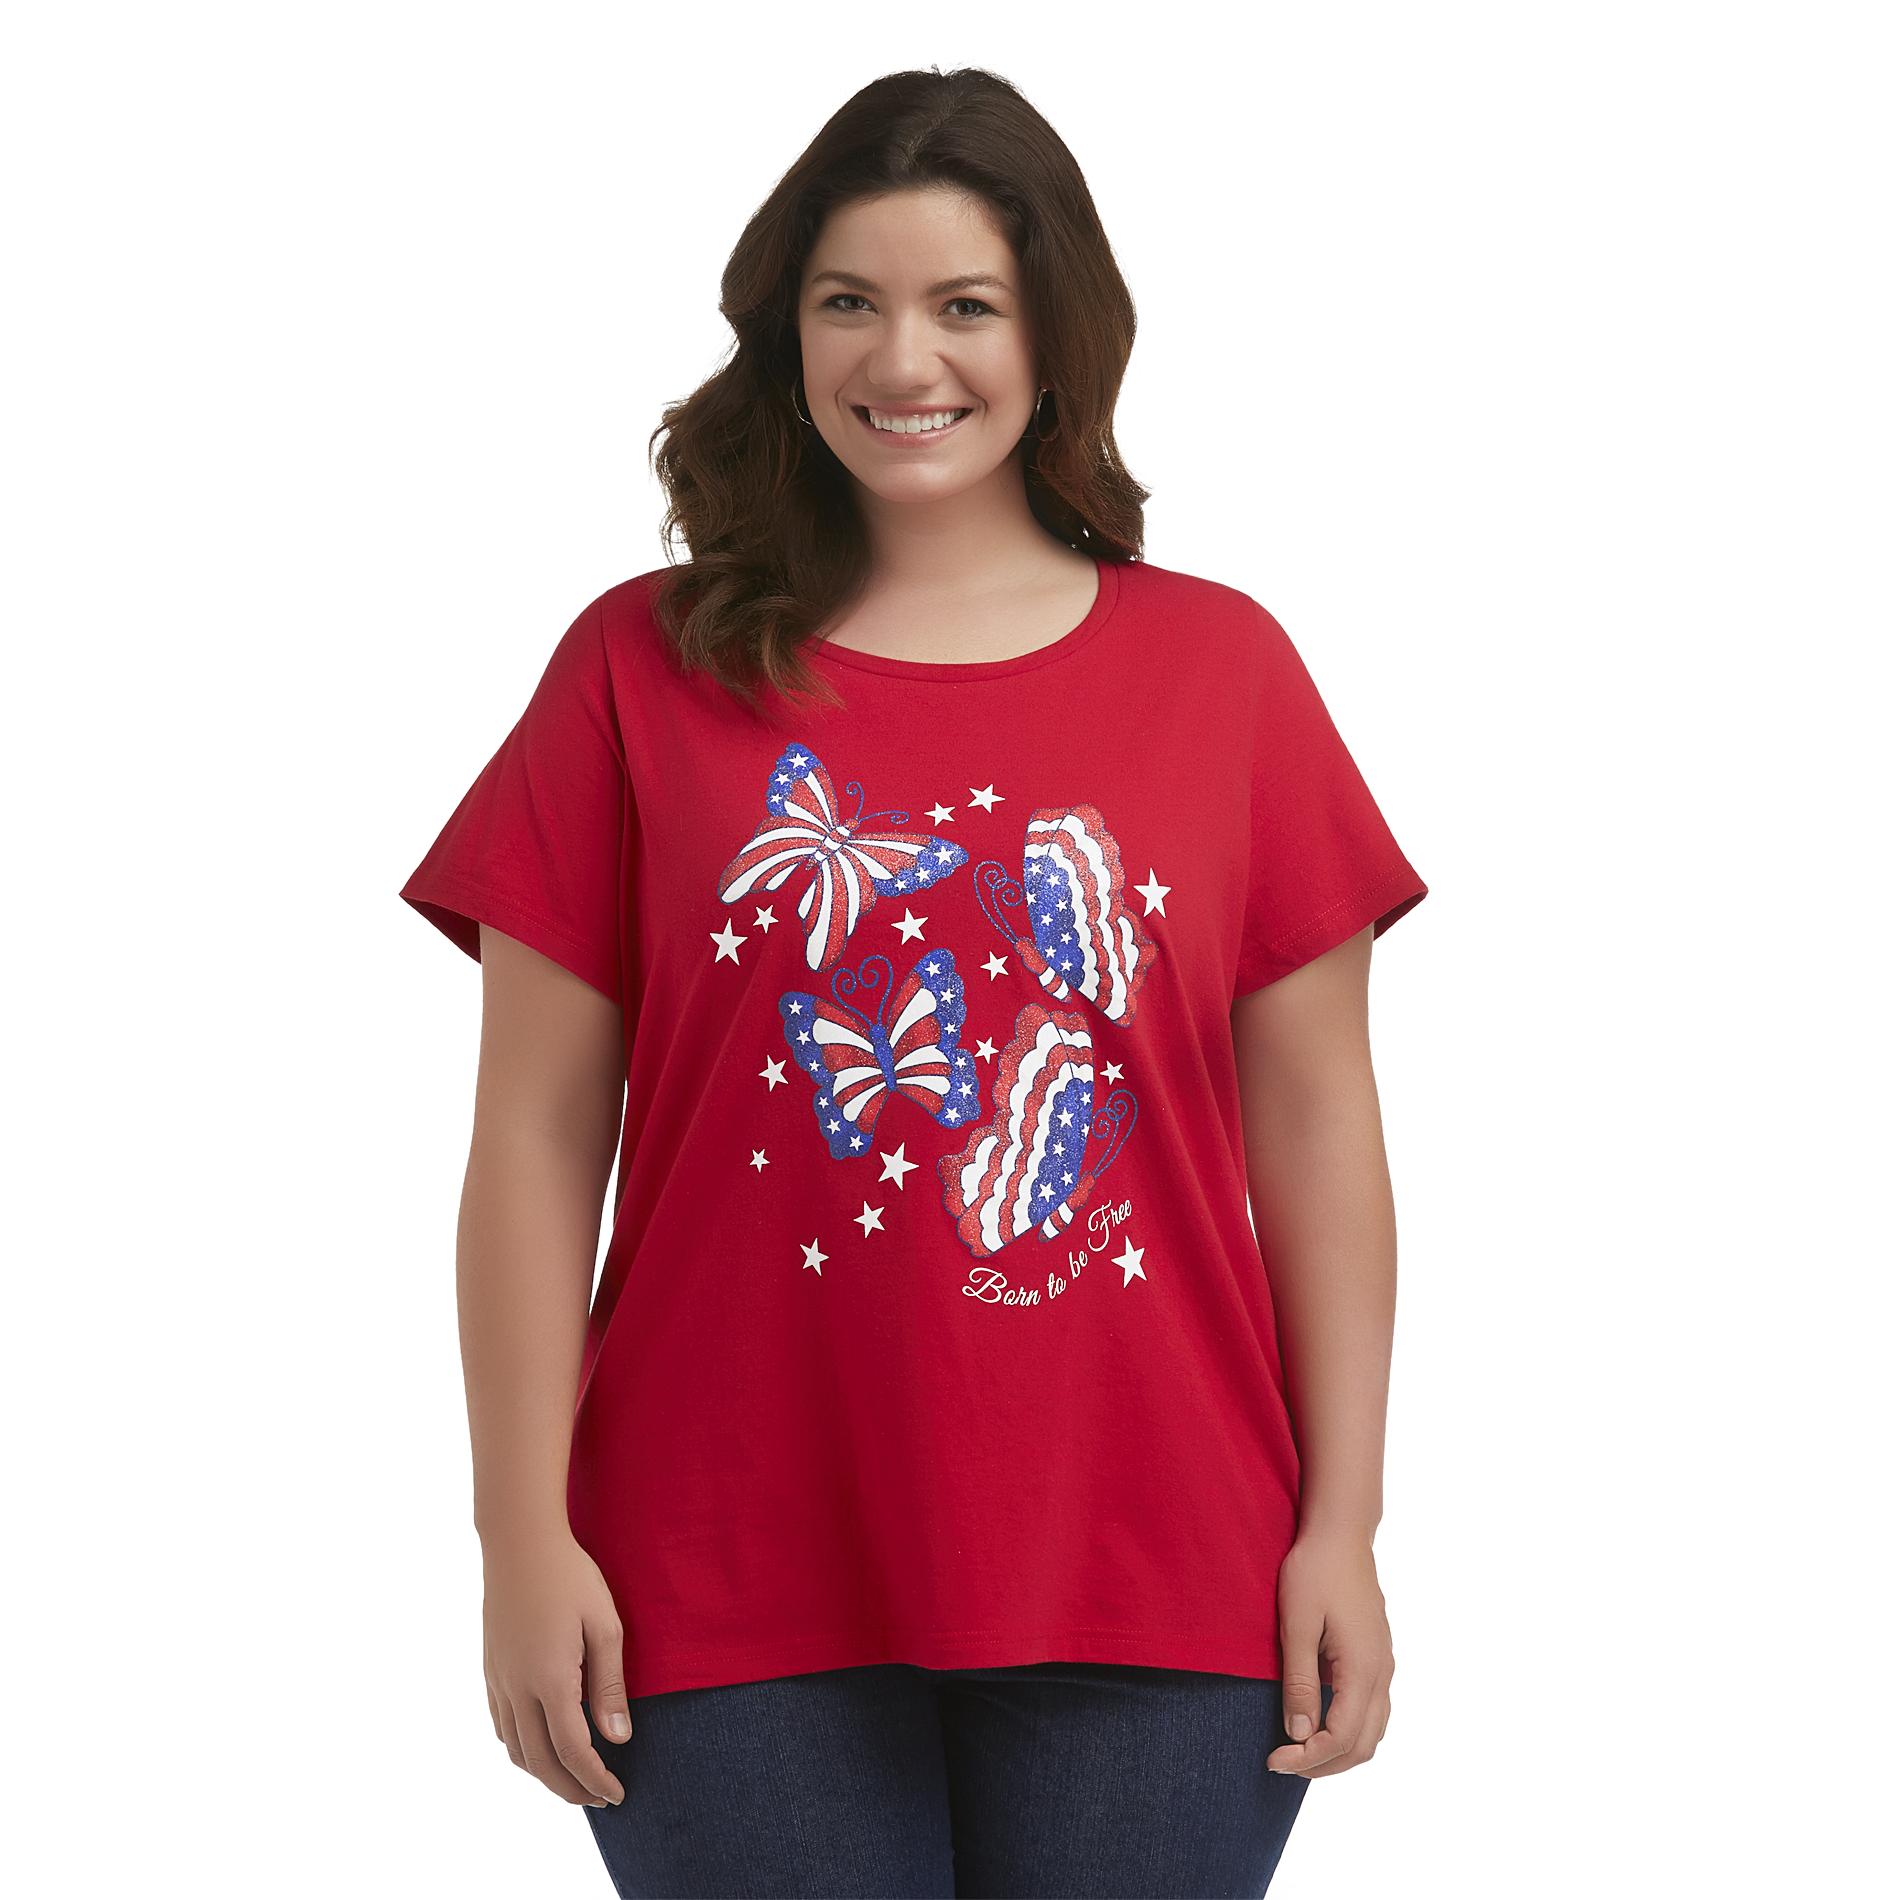 Holiday Editions Women's Plus Graphic T-Shirt - Born To Be Free